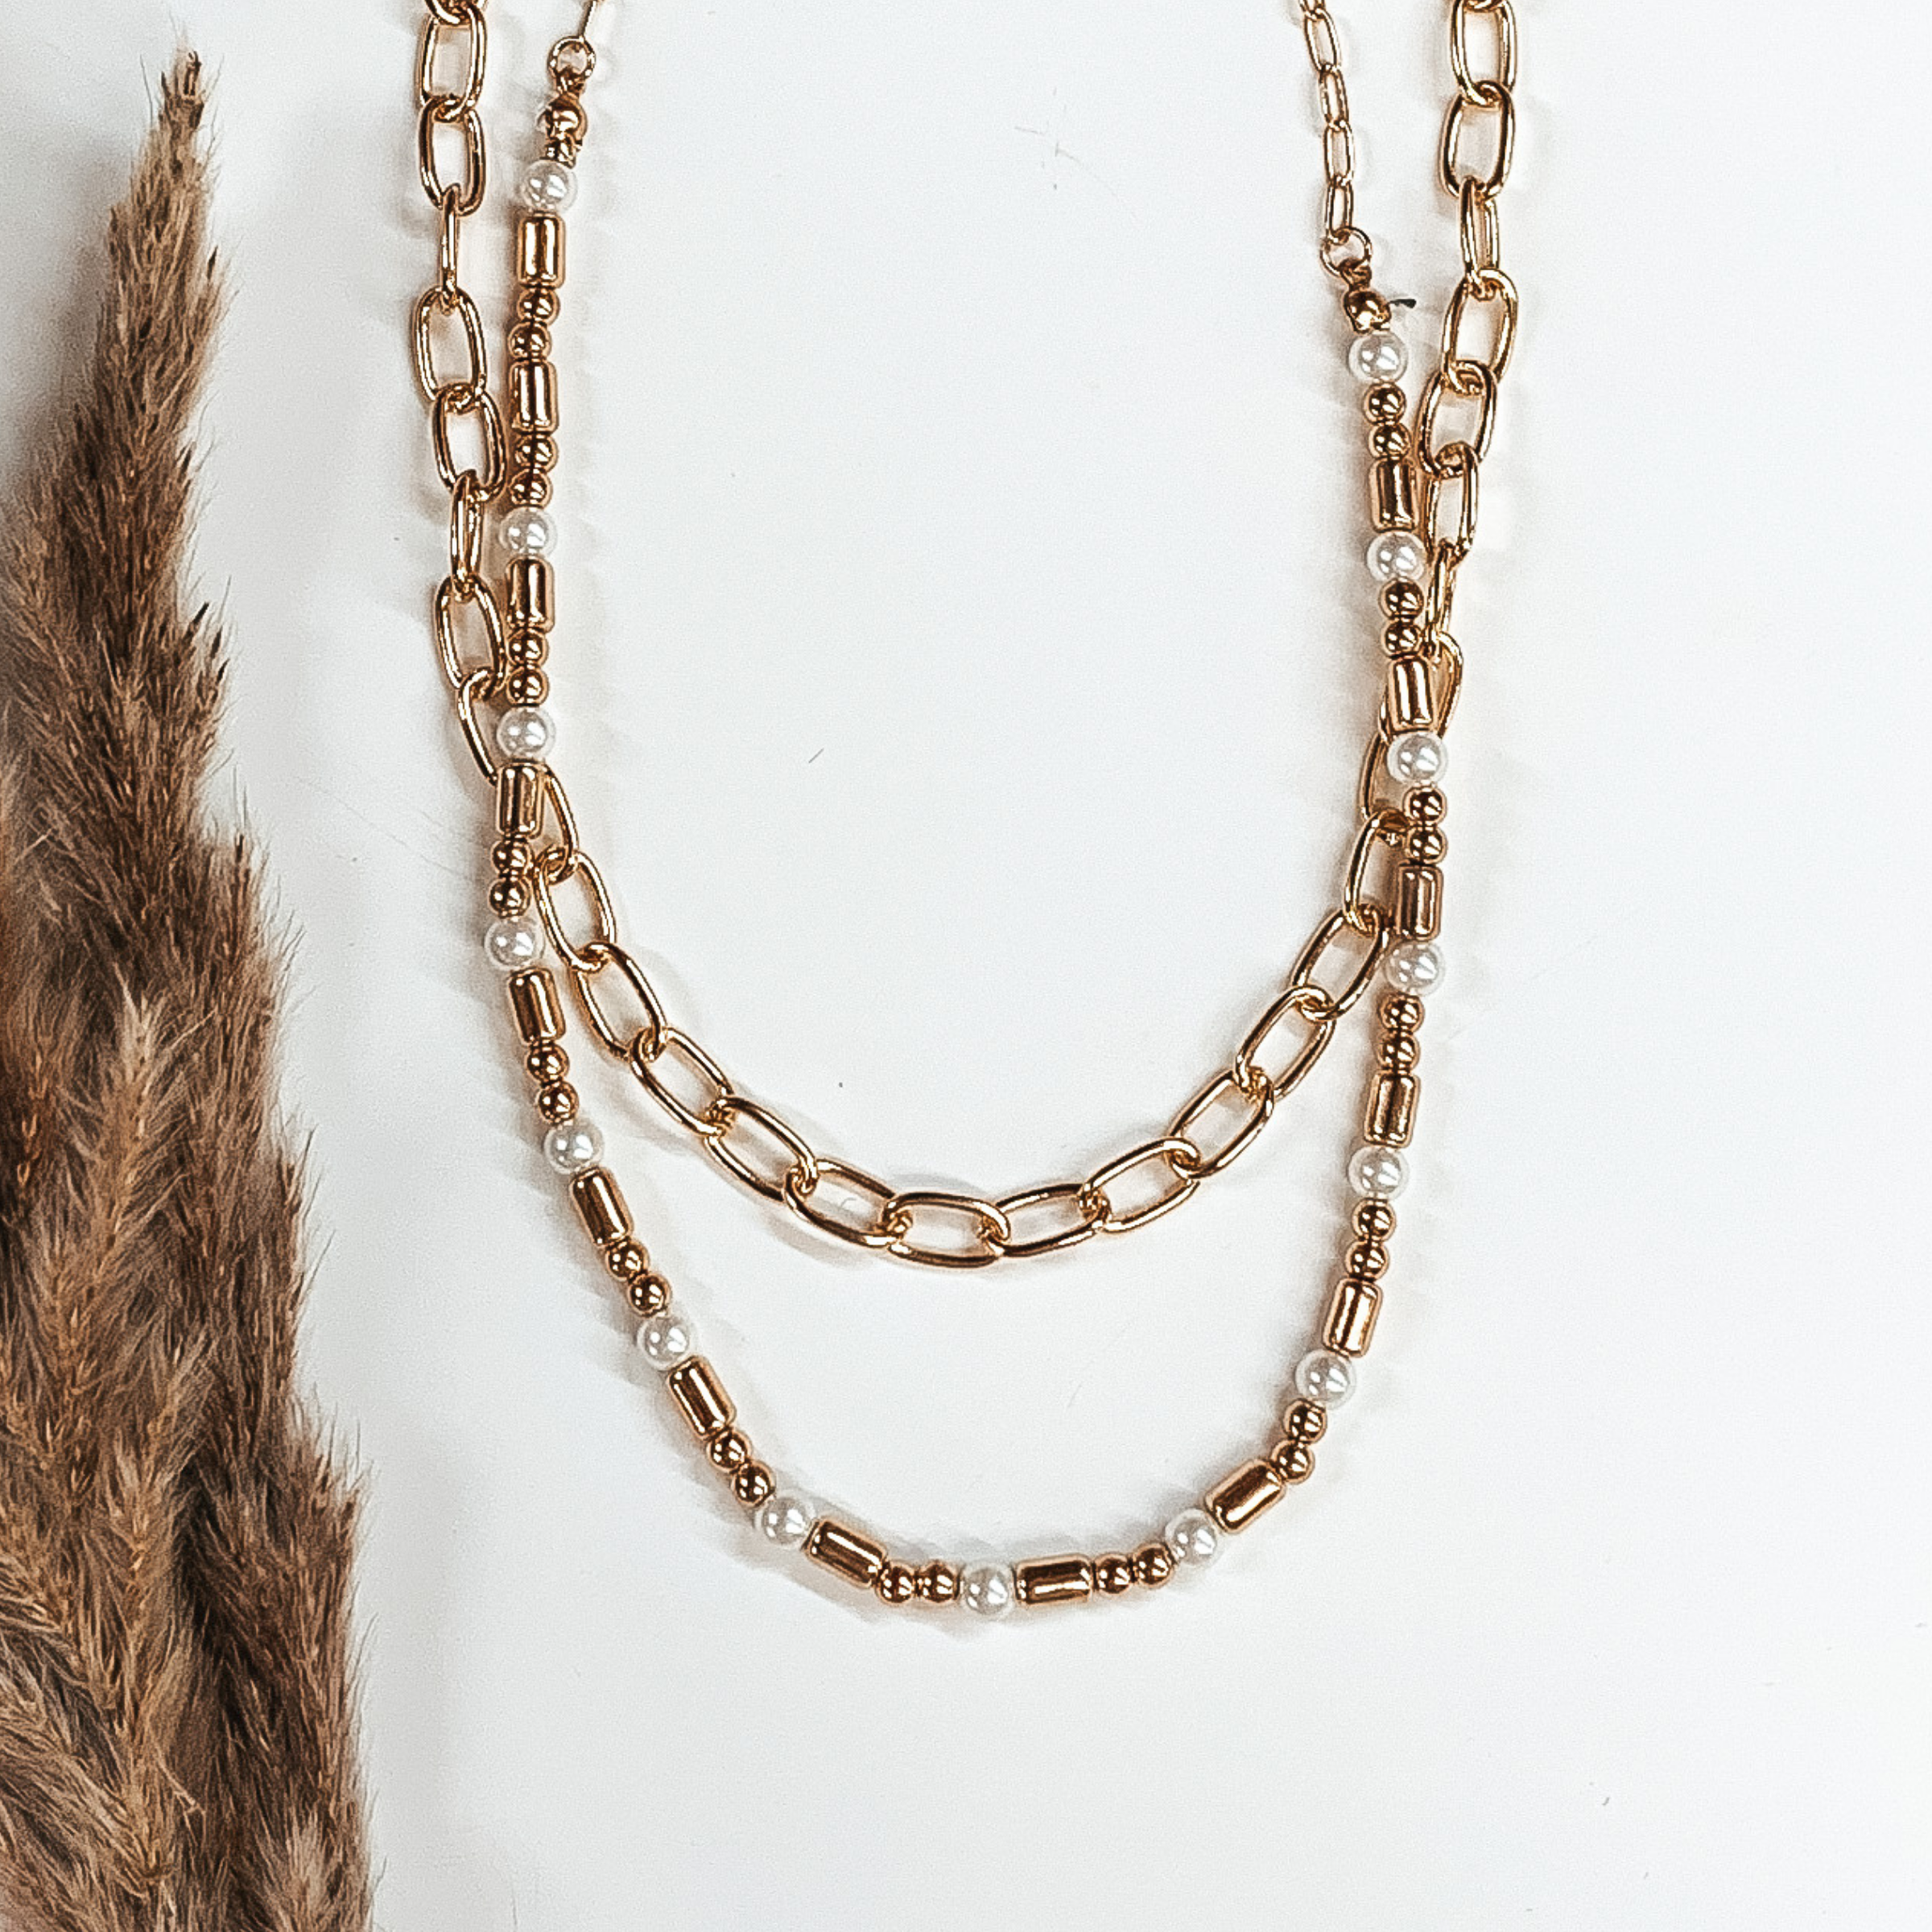 Truly Tempting Gold Necklace Set with White Pearls - Giddy Up Glamour Boutique